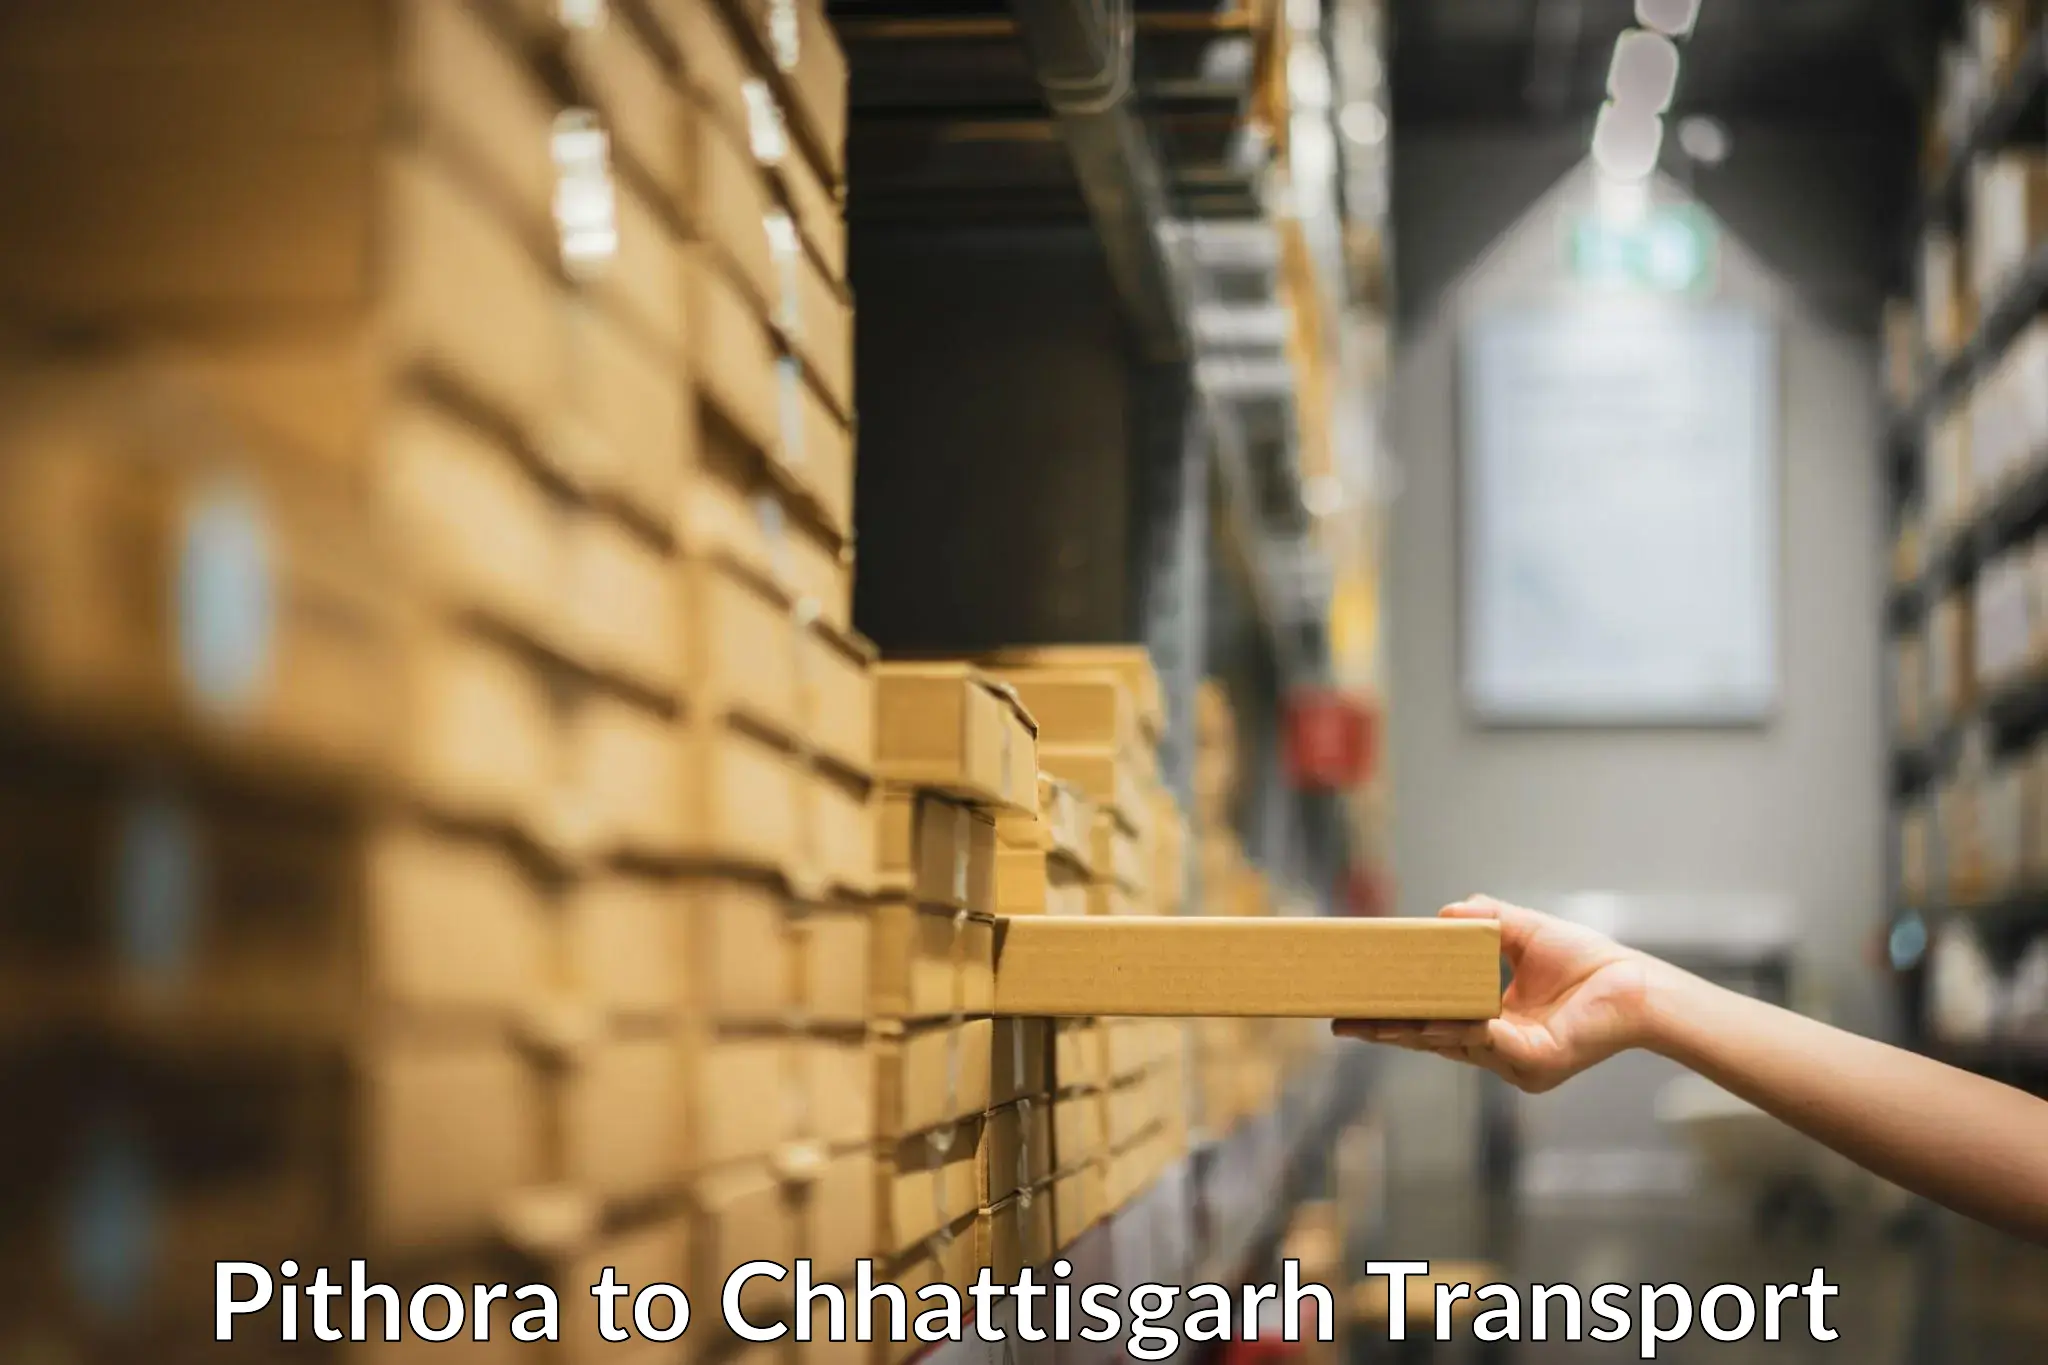 Truck transport companies in India Pithora to Raigarh